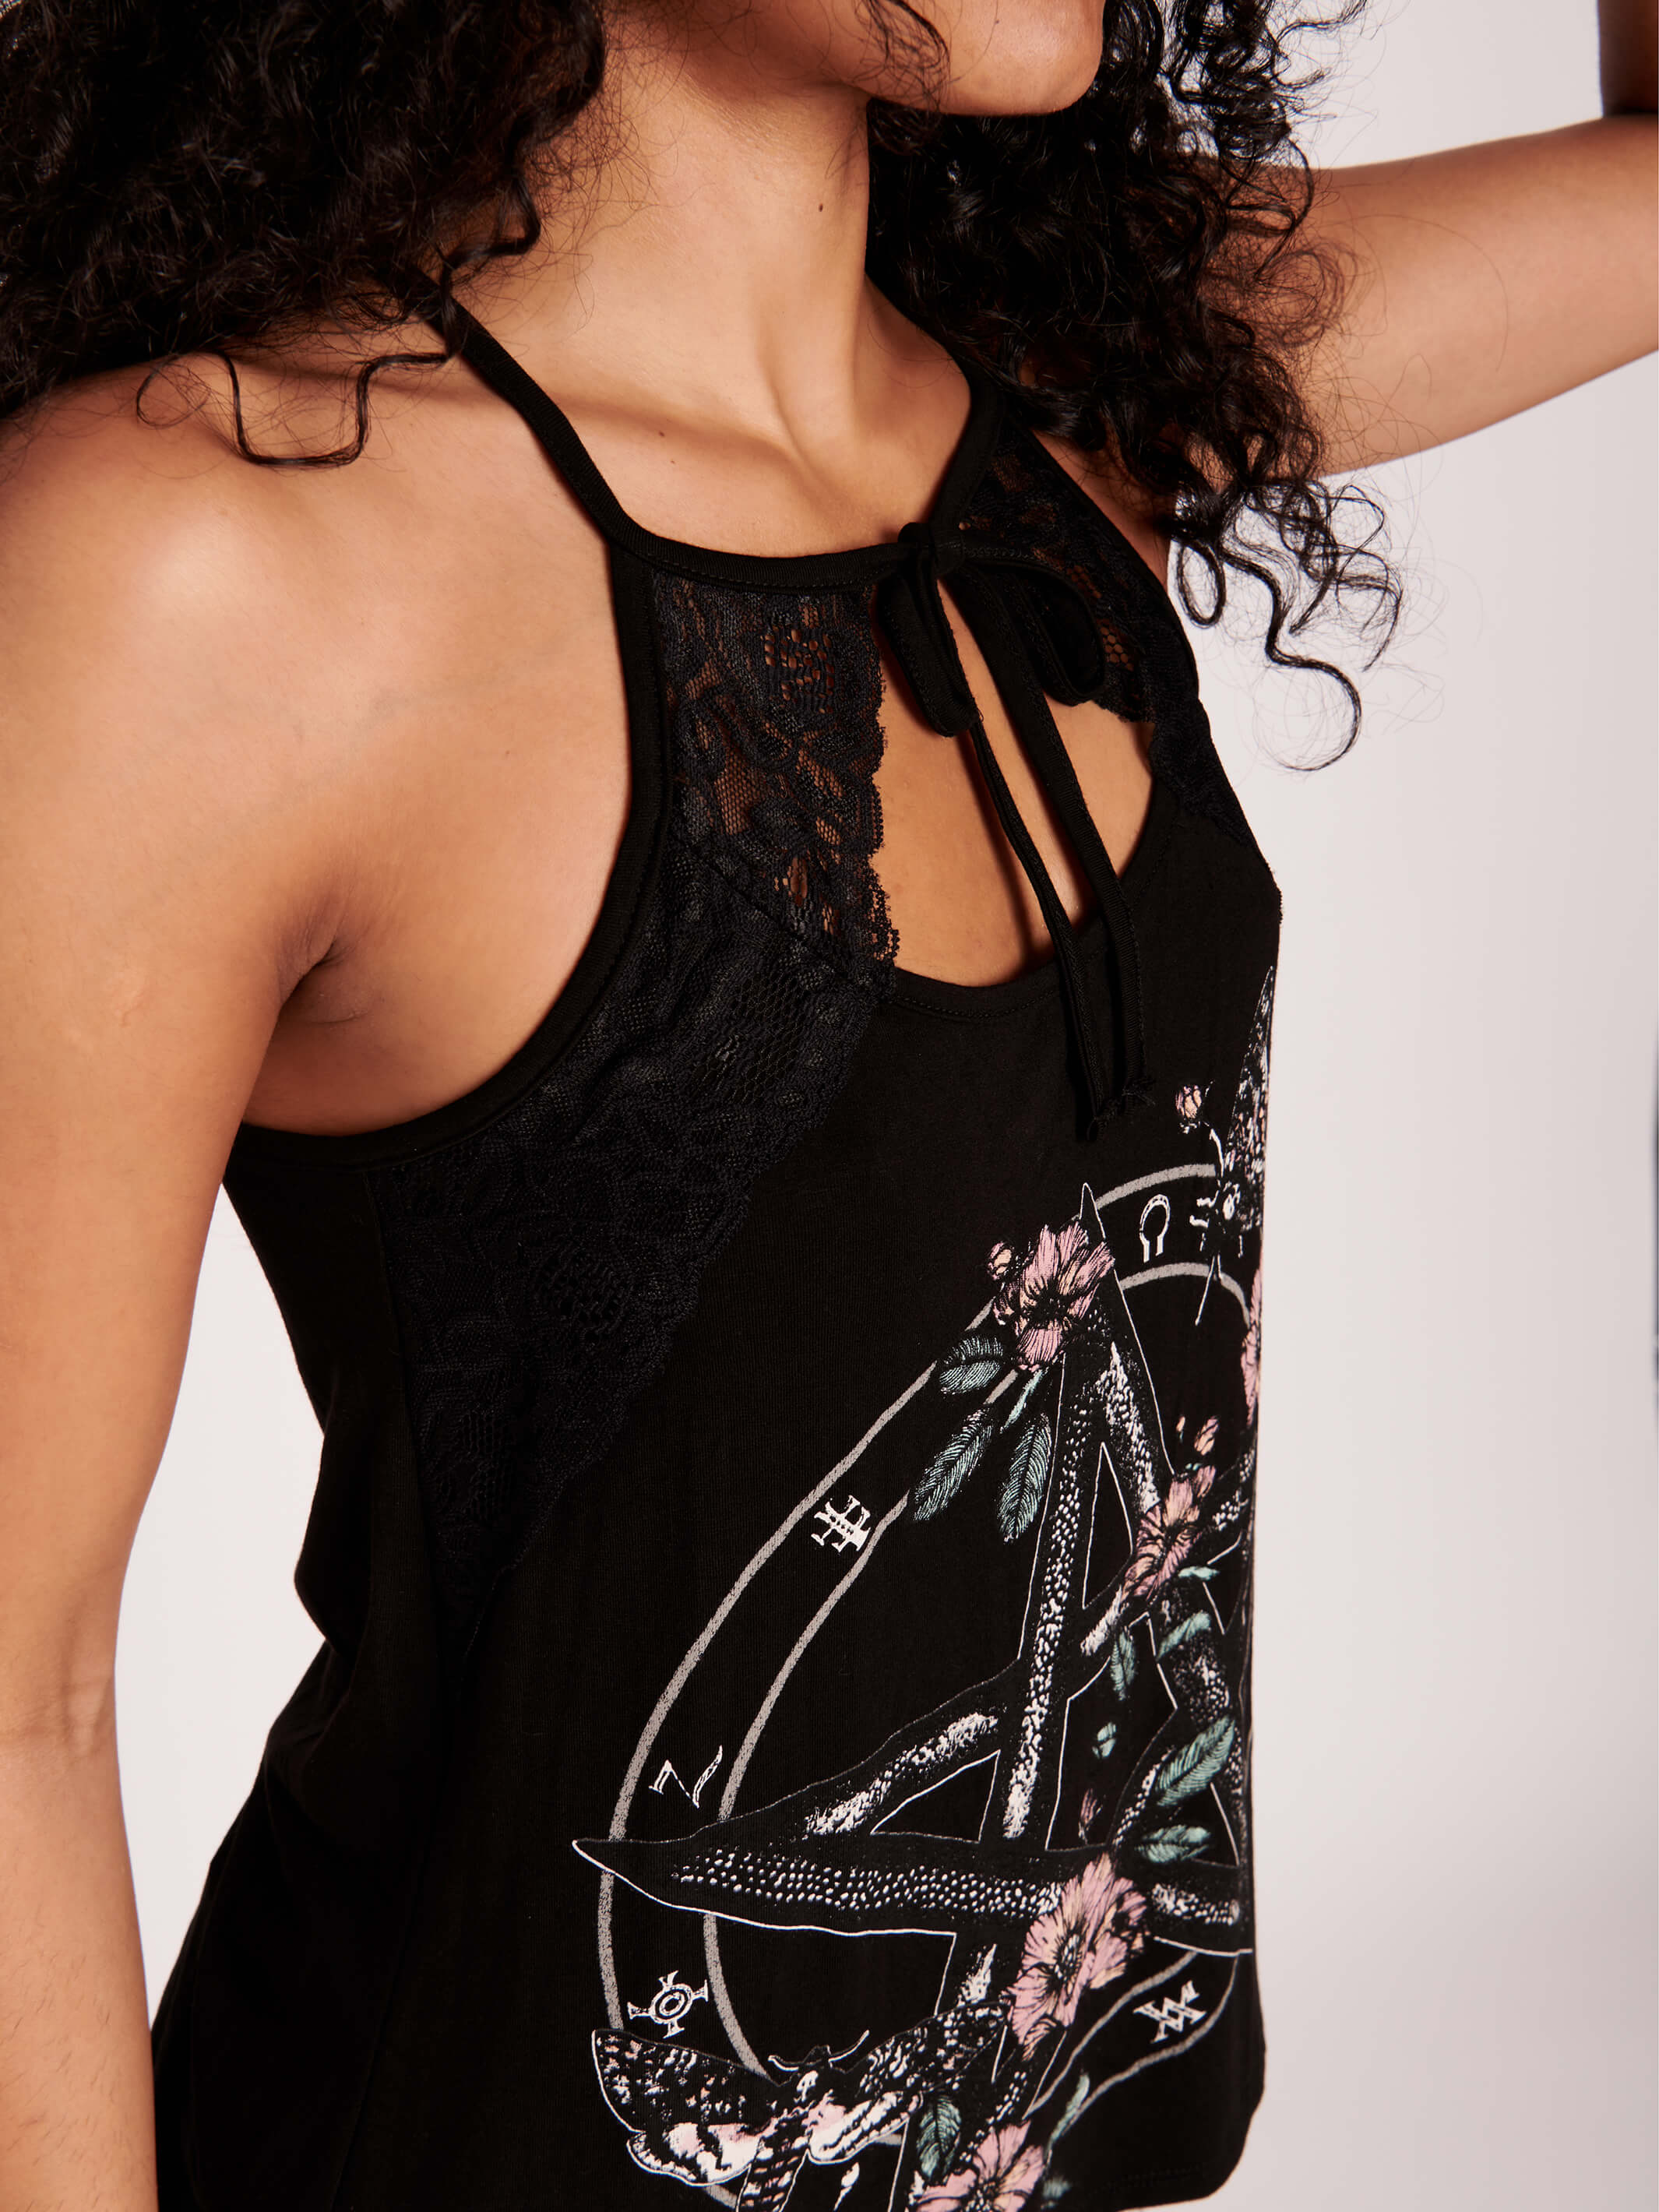 It's a hot goth girl summer in our pentacle witchy tank. Pastel floral, moths, and witchy symbols with victorian lace detailing. Black gothic tank top. Stand out from the masses with this beautifully crafted tank with black lace details..